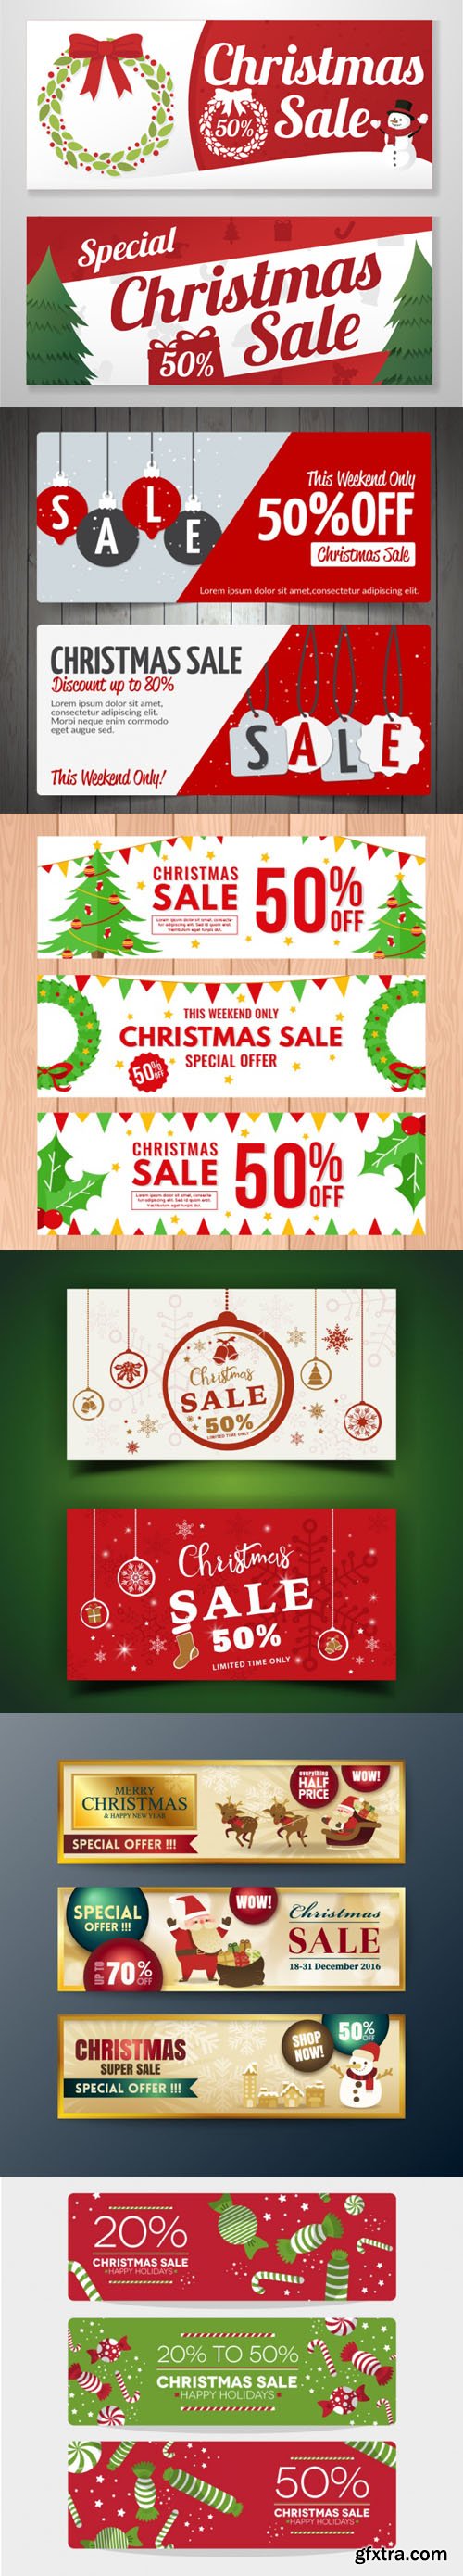 Set of Banners of Christmas Sales in Vector [AI/EPS]